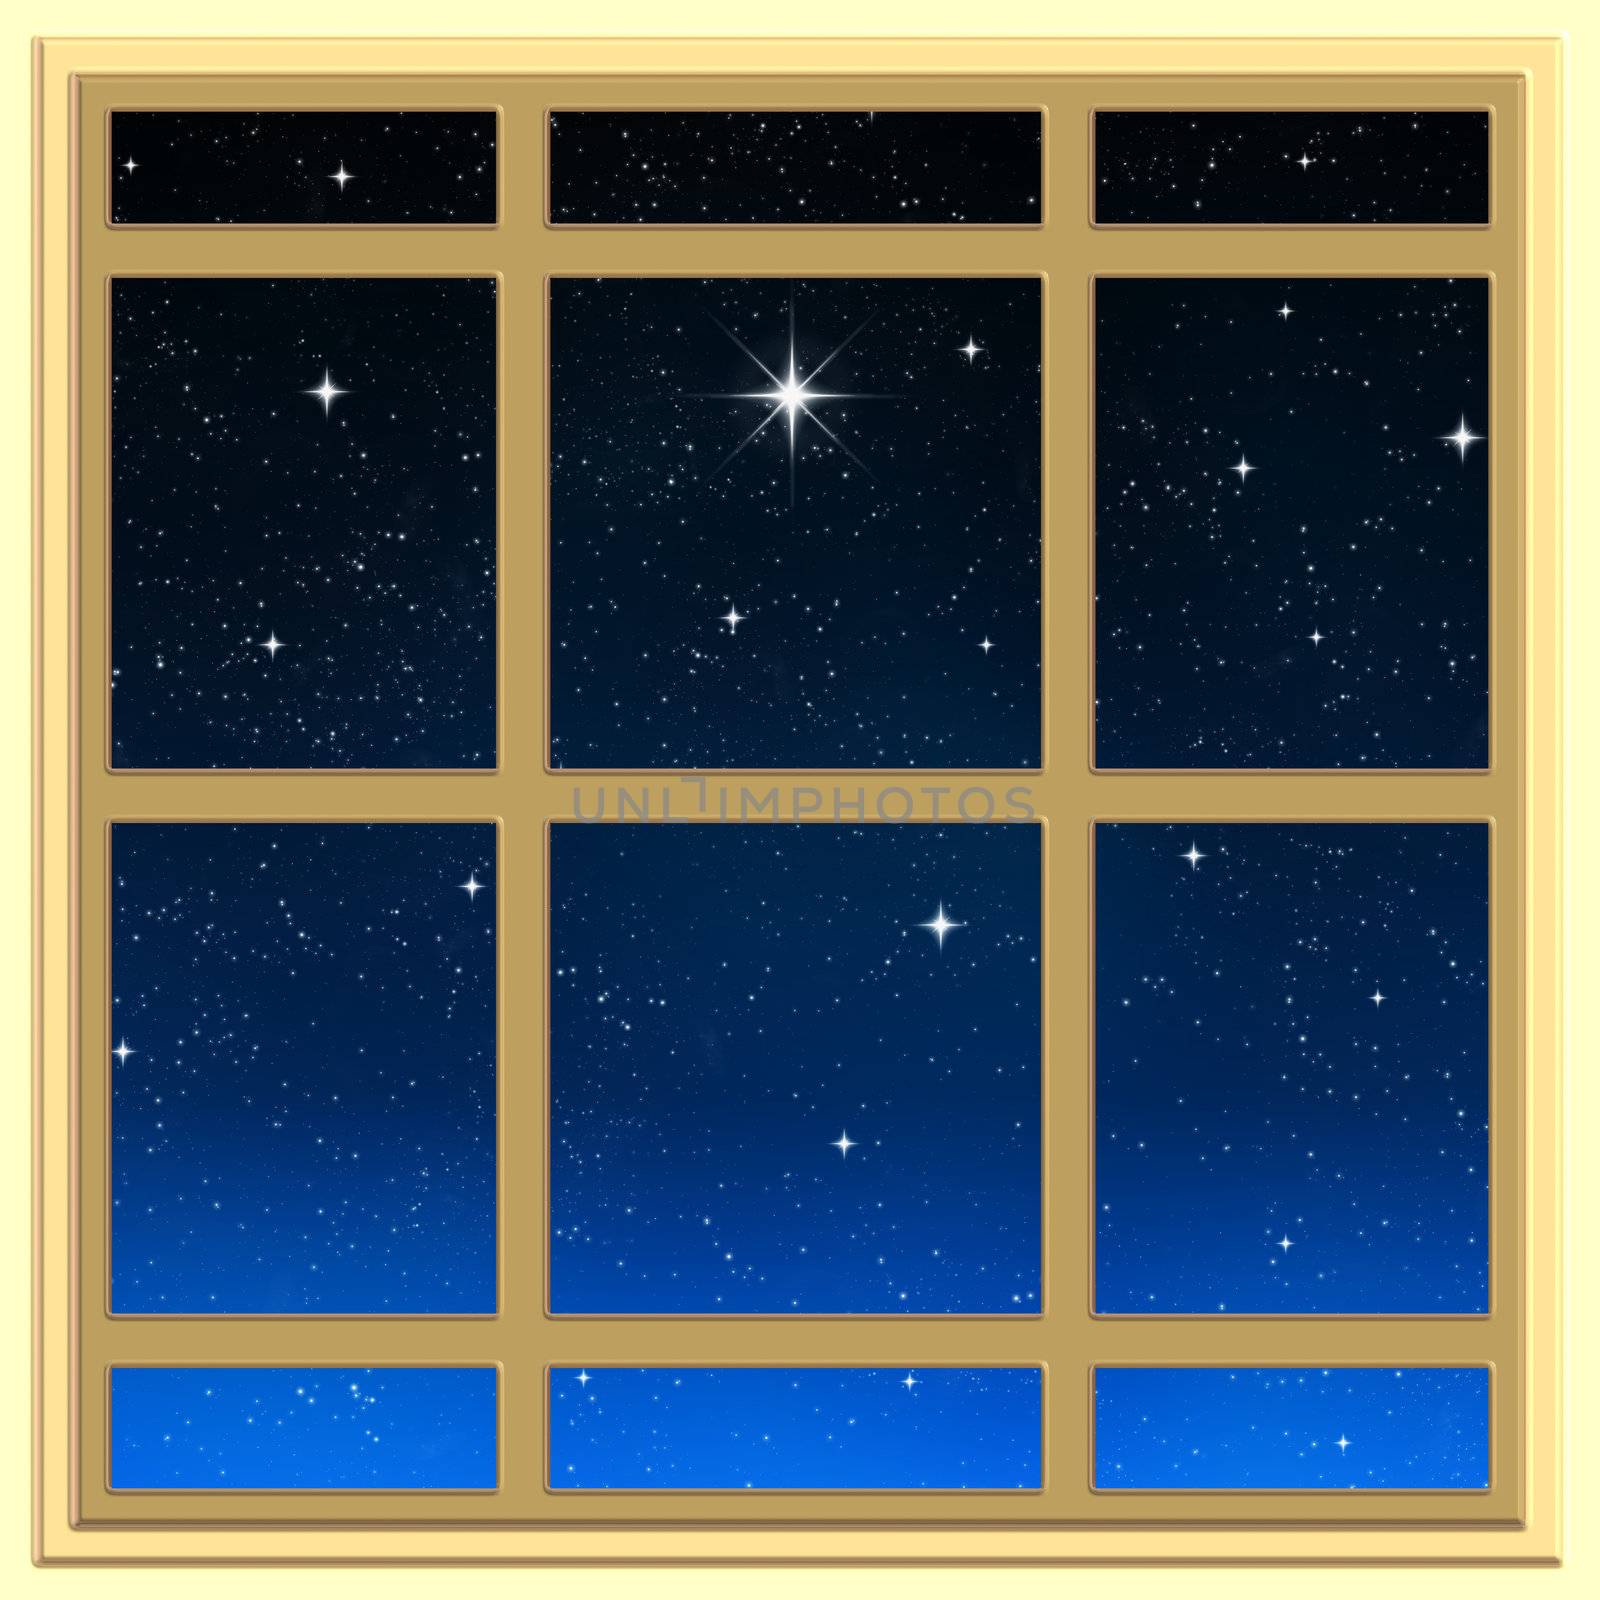 bright star through the window by clearviewstock